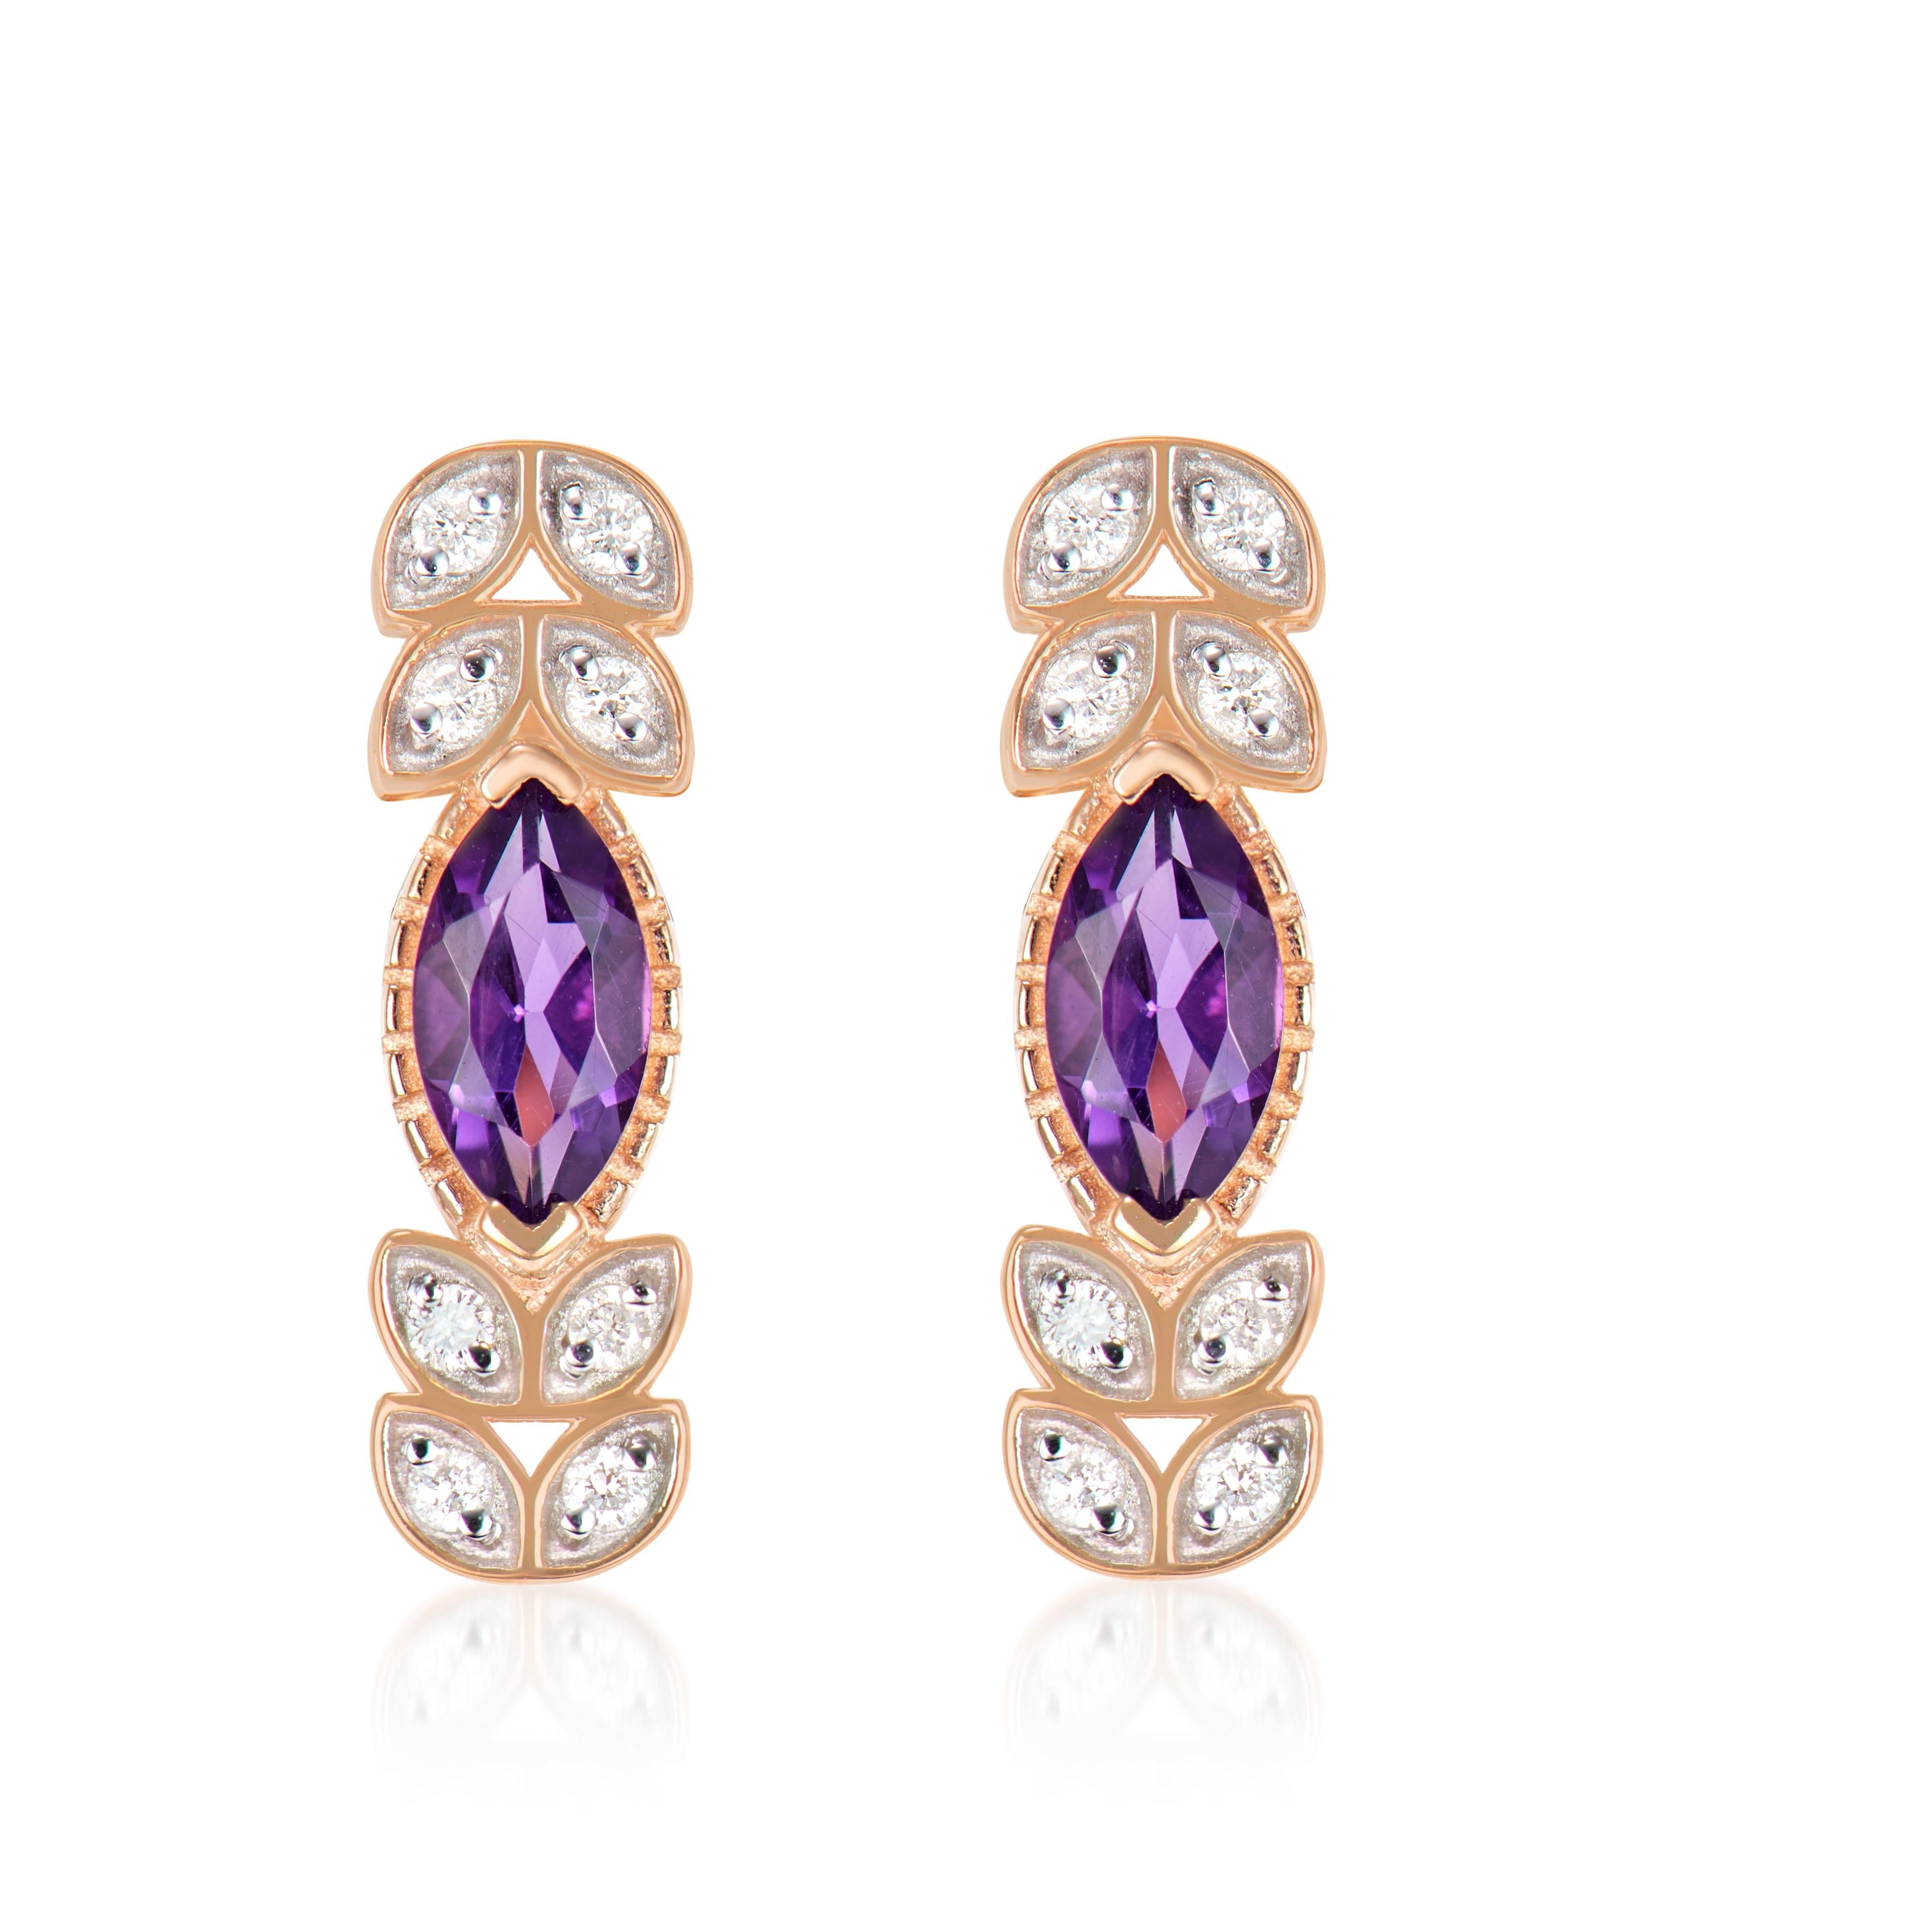 Contemporary 0.99 Carat Amethyst Drop Earrings in 14Karat Rose Gold with White Diamond. For Sale